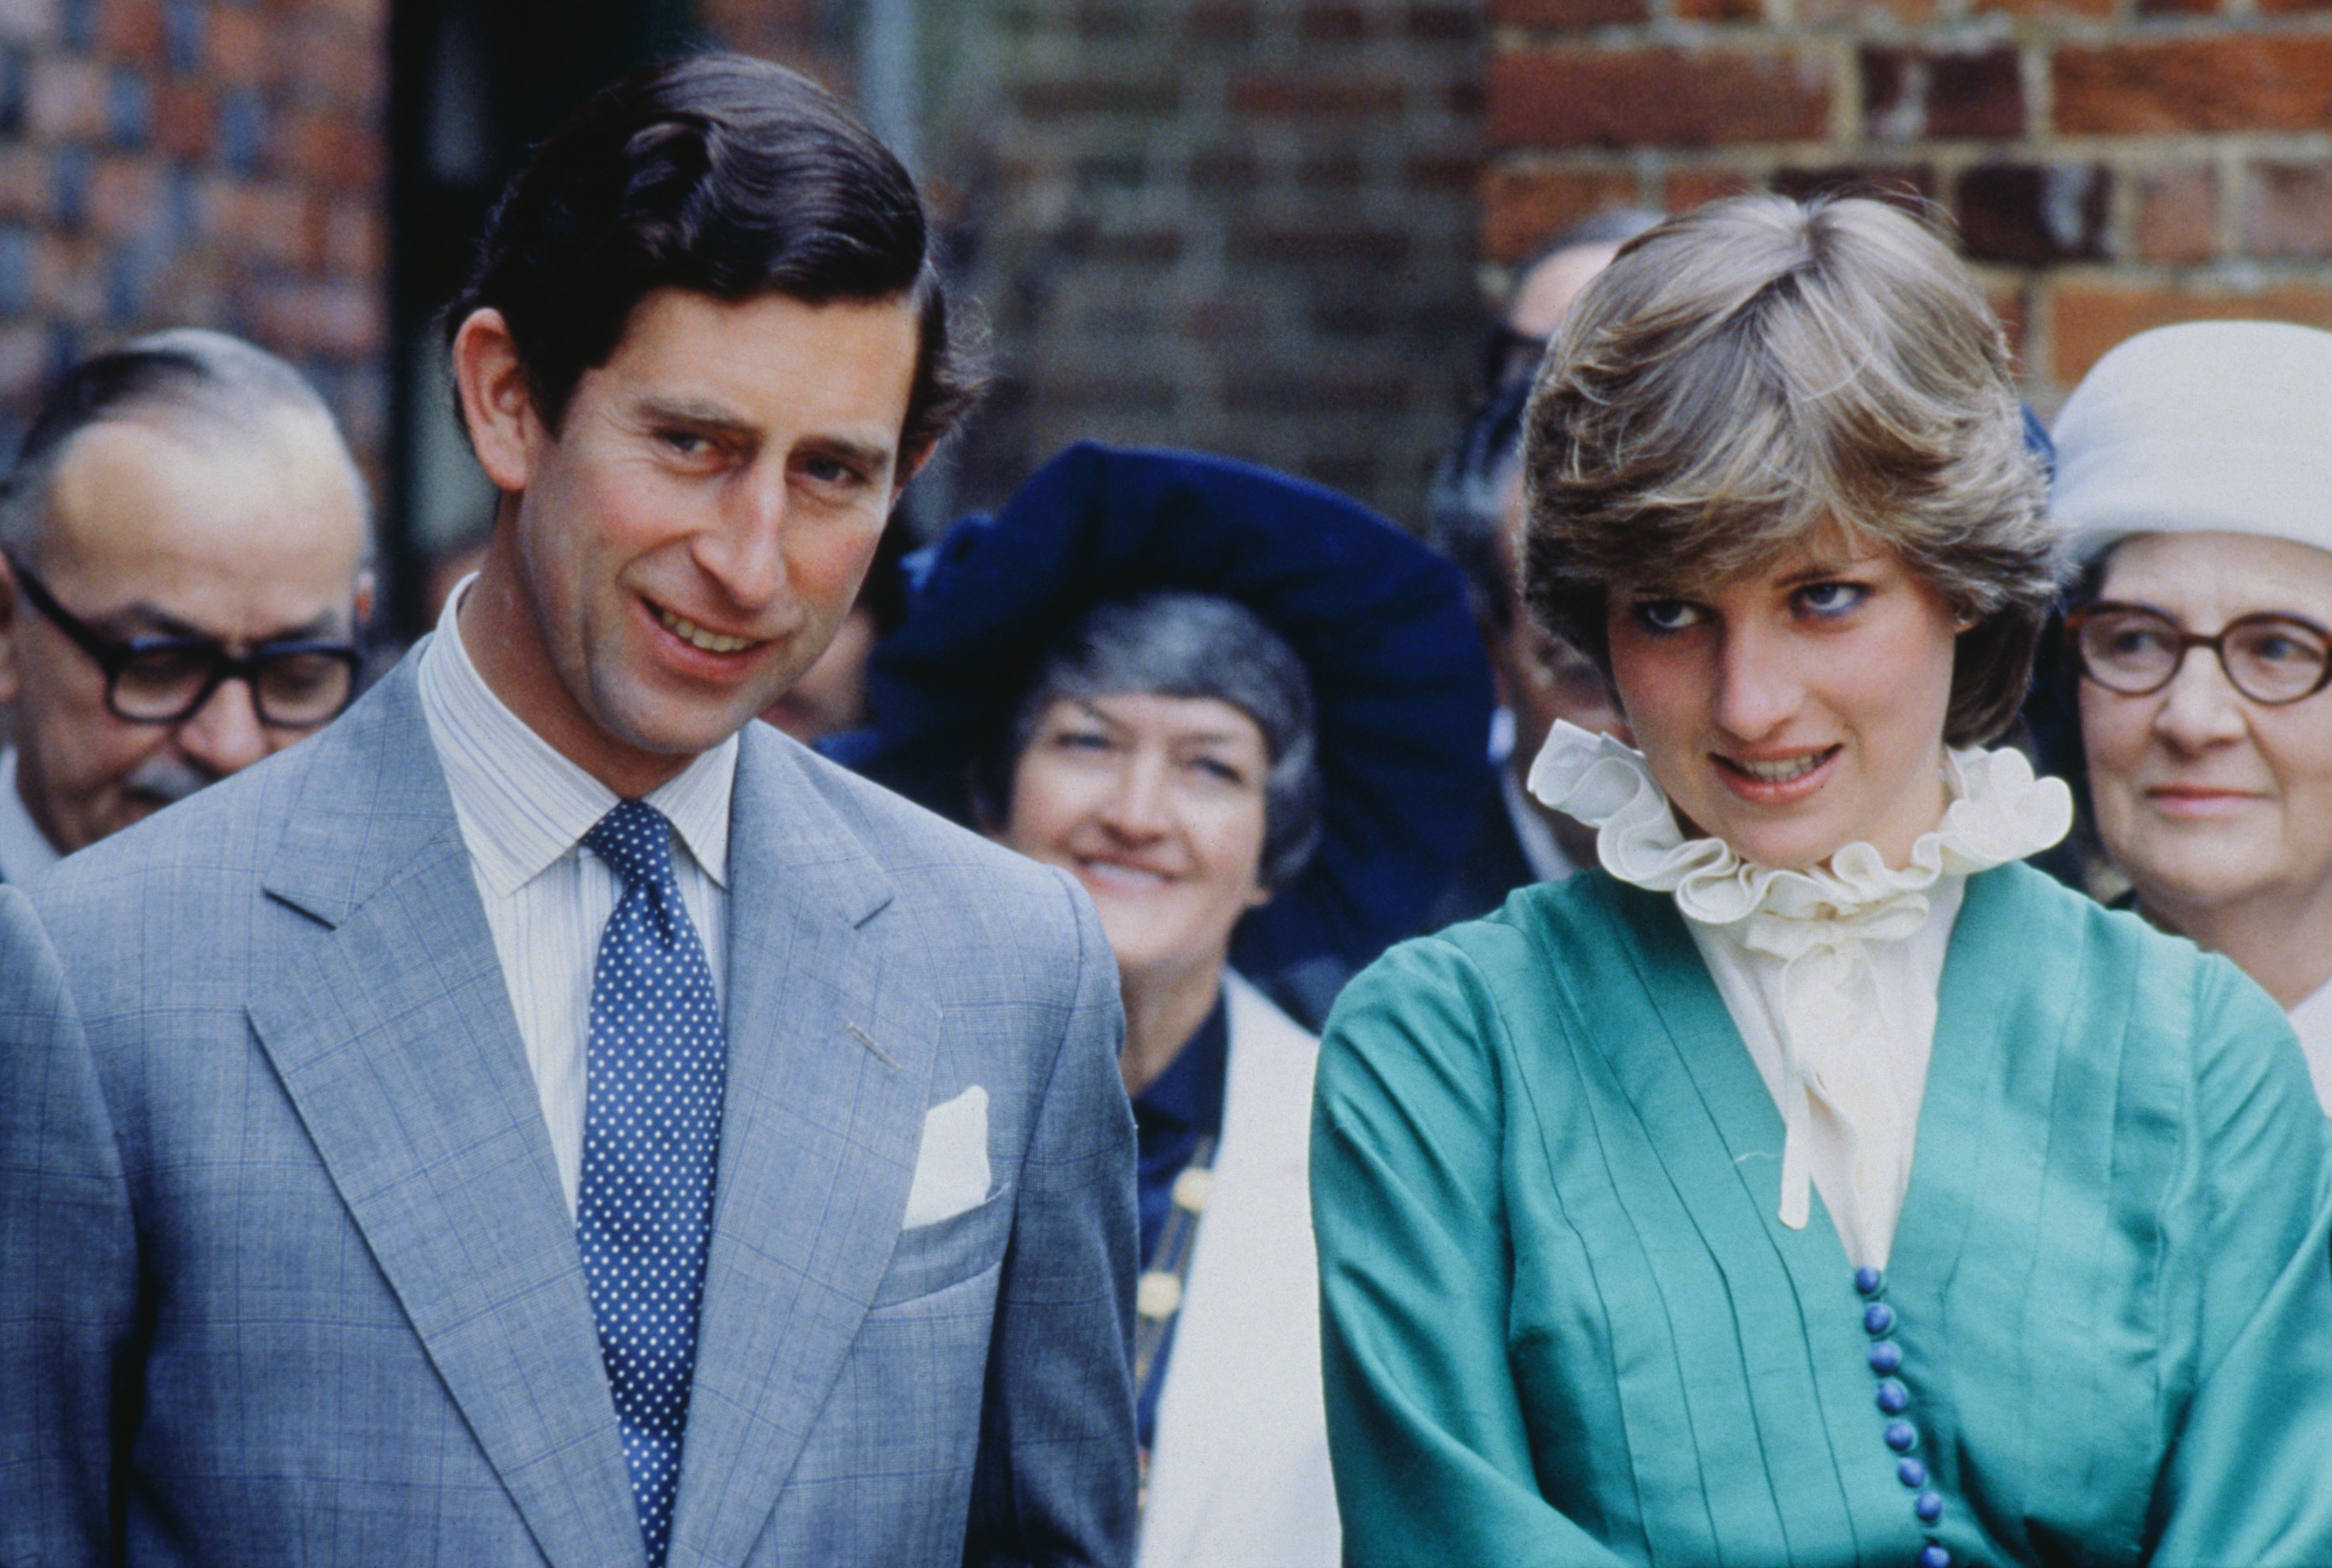 Prince Charles and Lady Diana Spencer opening the Mountbatten Exhibition at Broadlands, the home of Lord Louis Mountbatten, who was murdered in Ireland. | Source: Getty Images